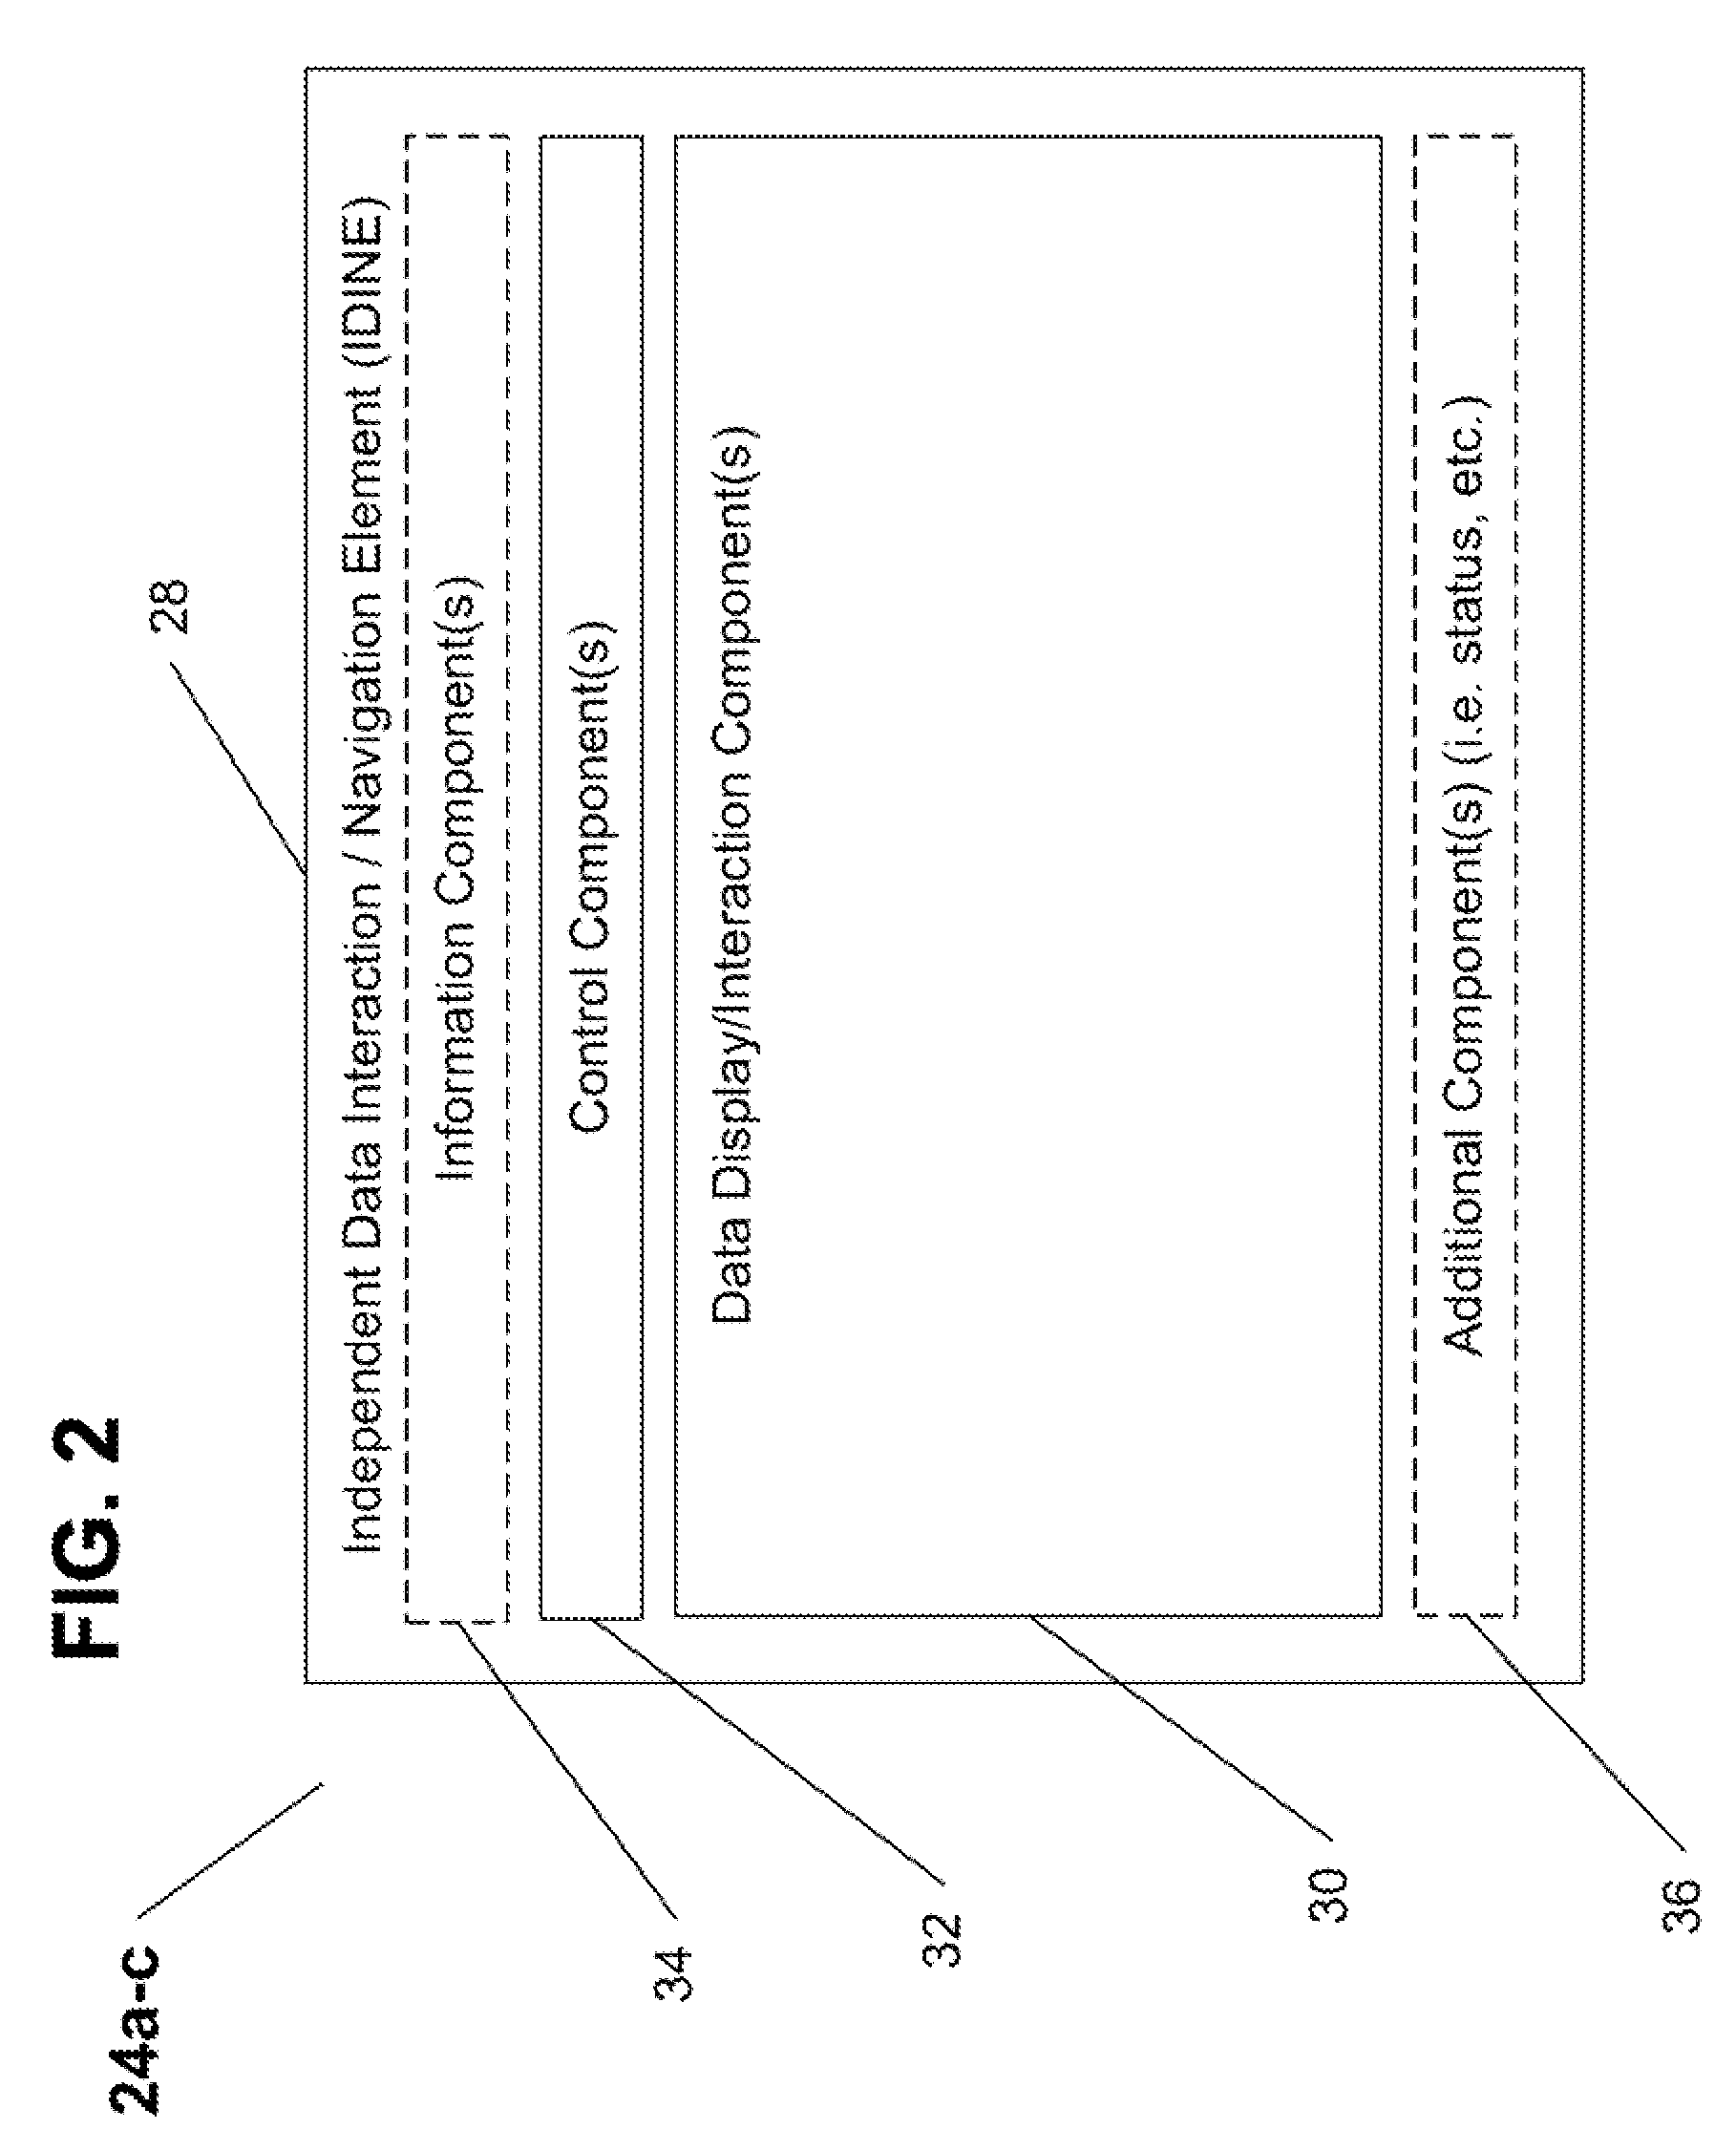 System and method for enabling at least one independent data navigation and interaction activity within a document